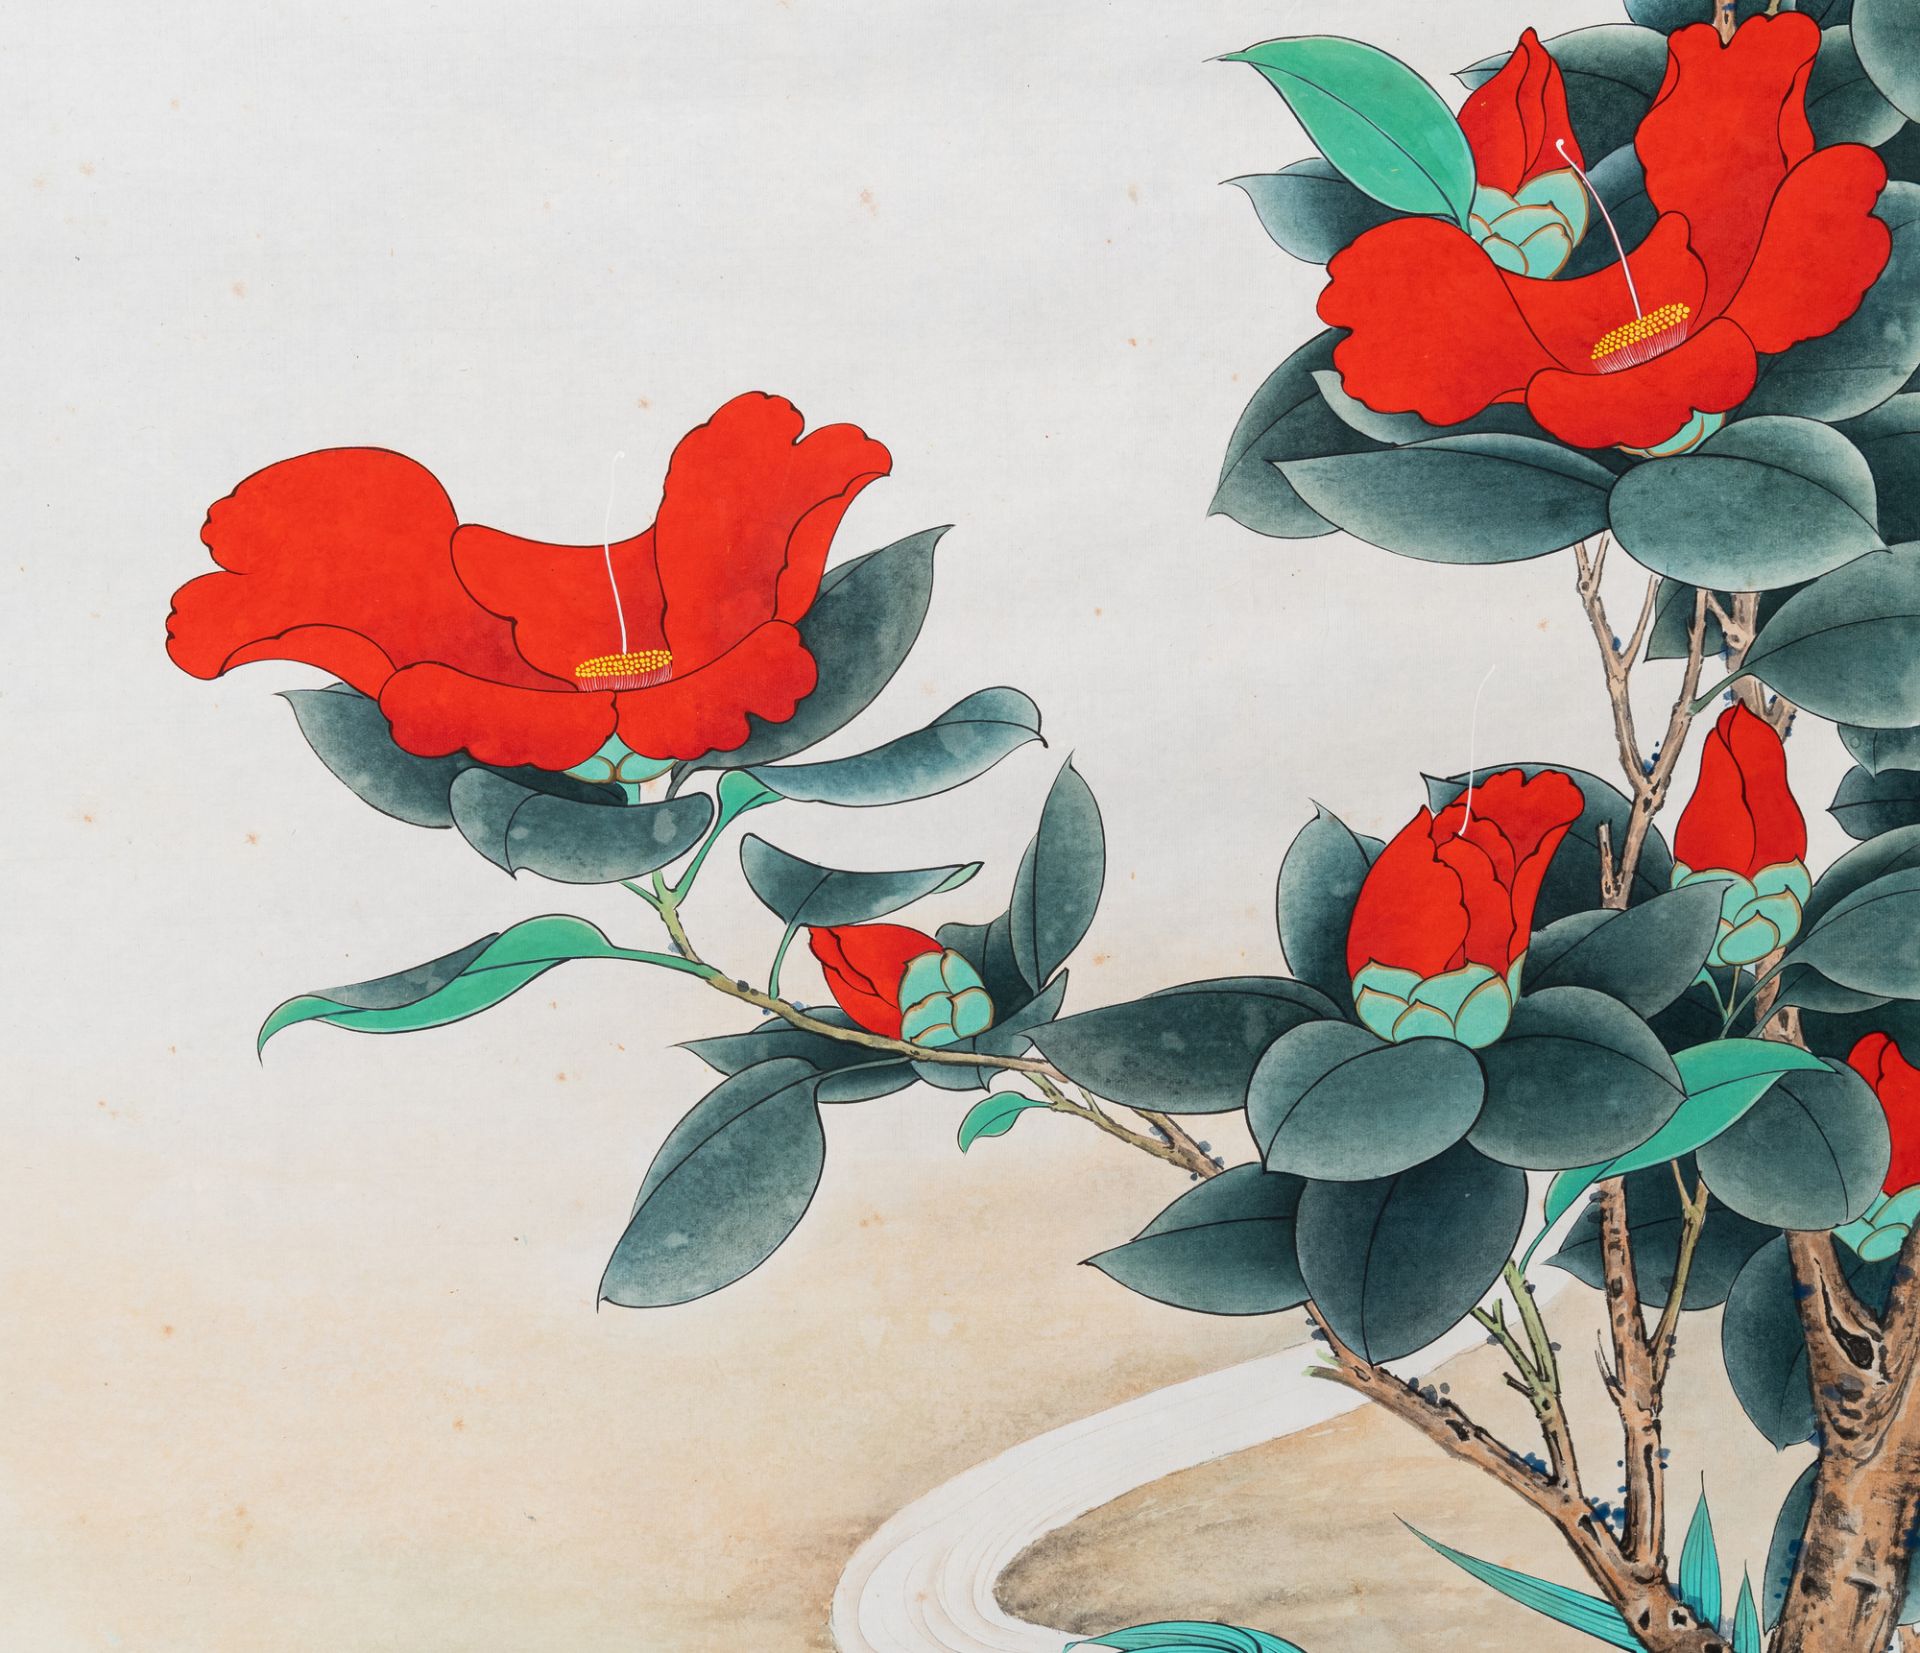 Sun Yunsheng (1918-2000): ÔPeace dovesÕ, ink and colour on paper - Image 6 of 21